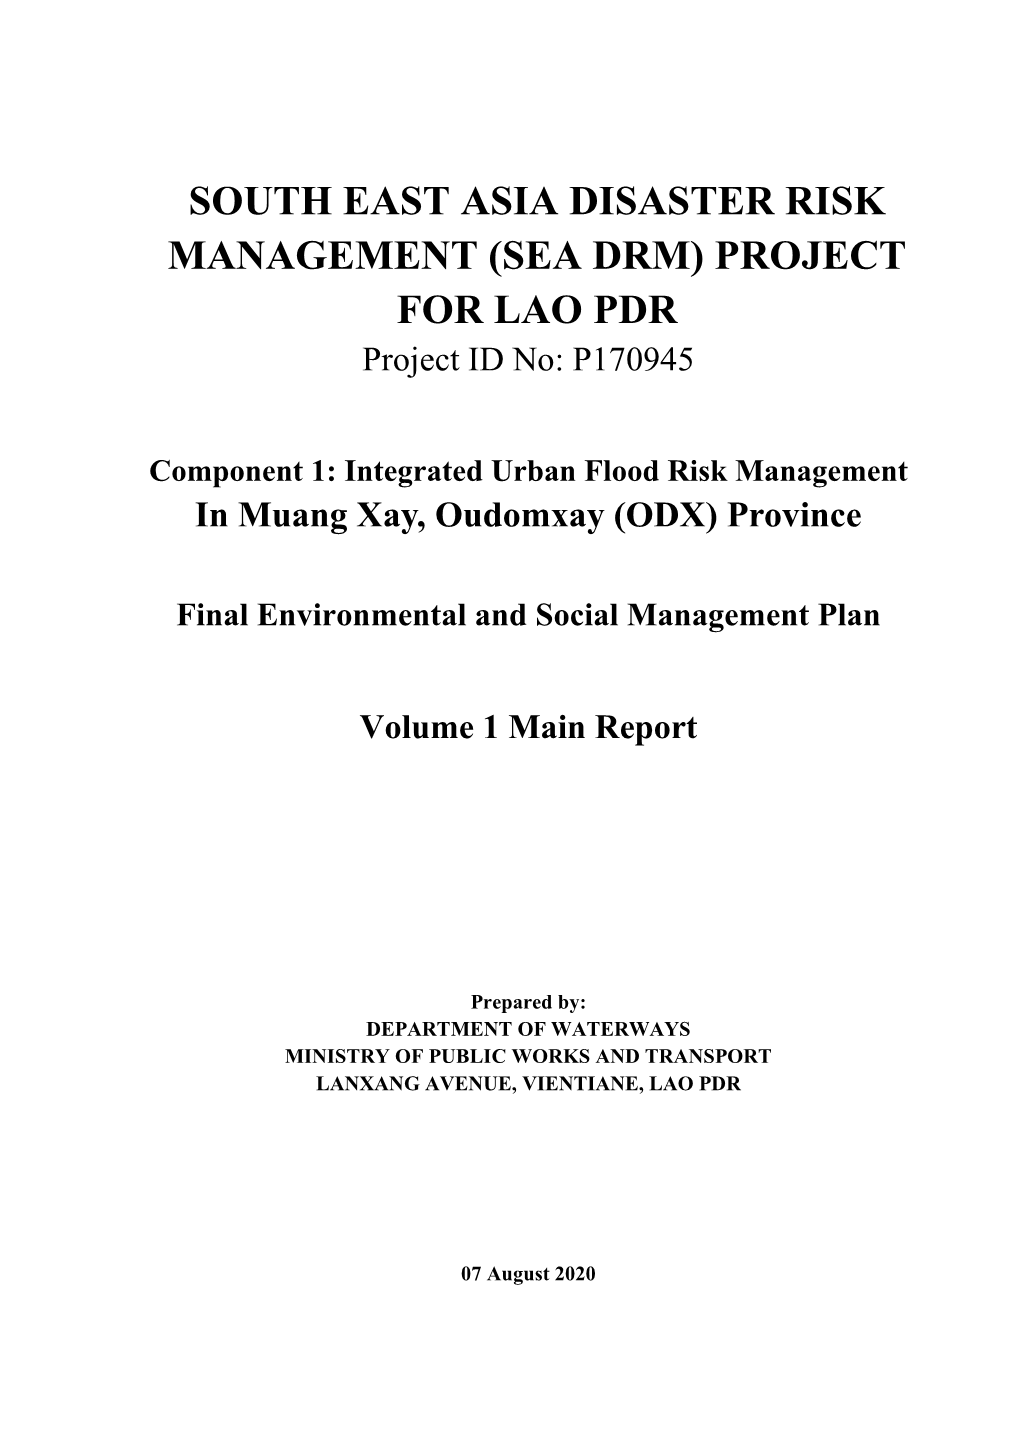 (SEA DRM) PROJECT for LAO PDR Project ID No: P170945